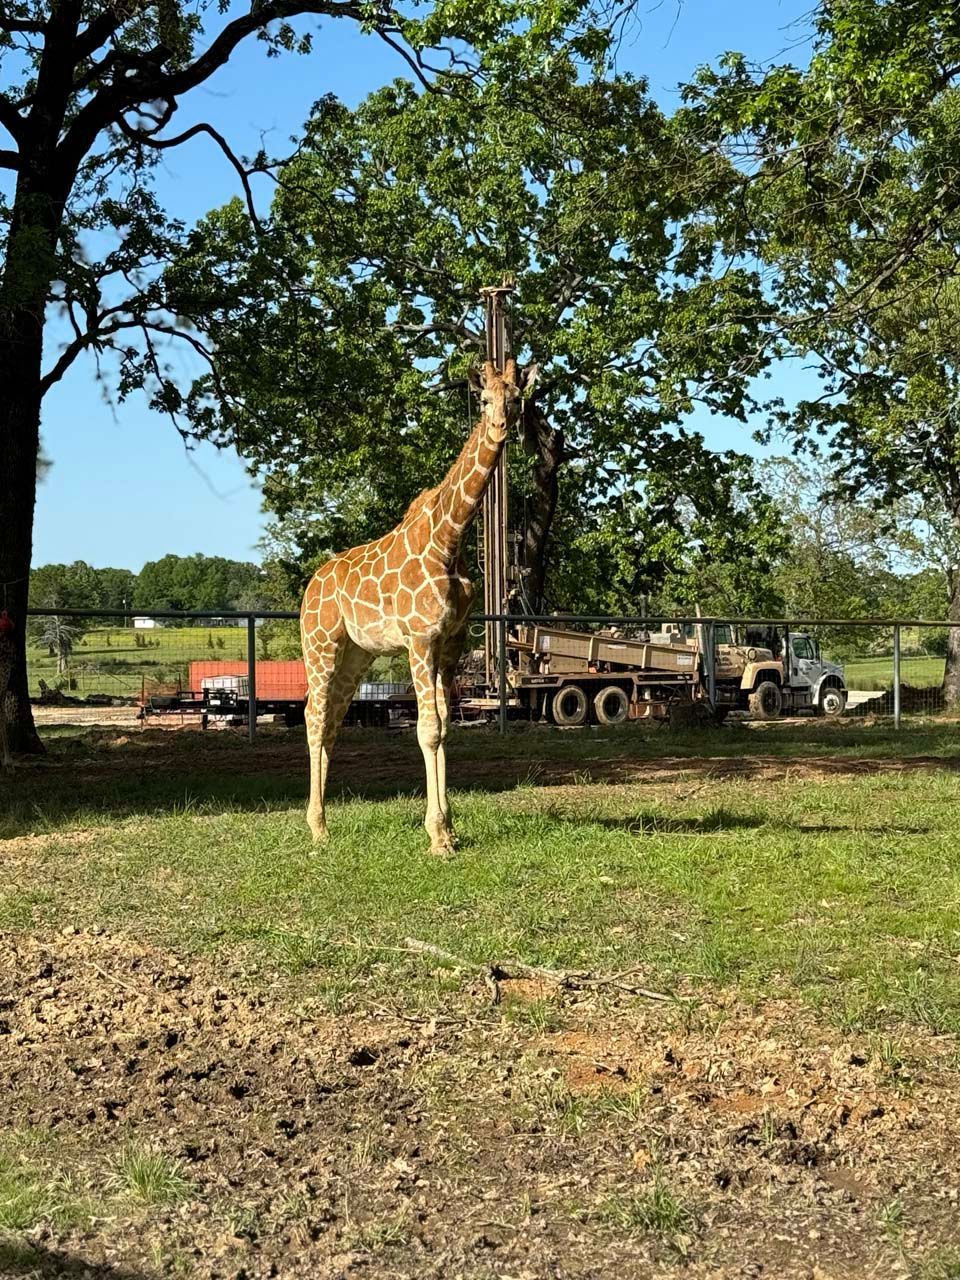 A giraffe standing in a field with a truck in the background